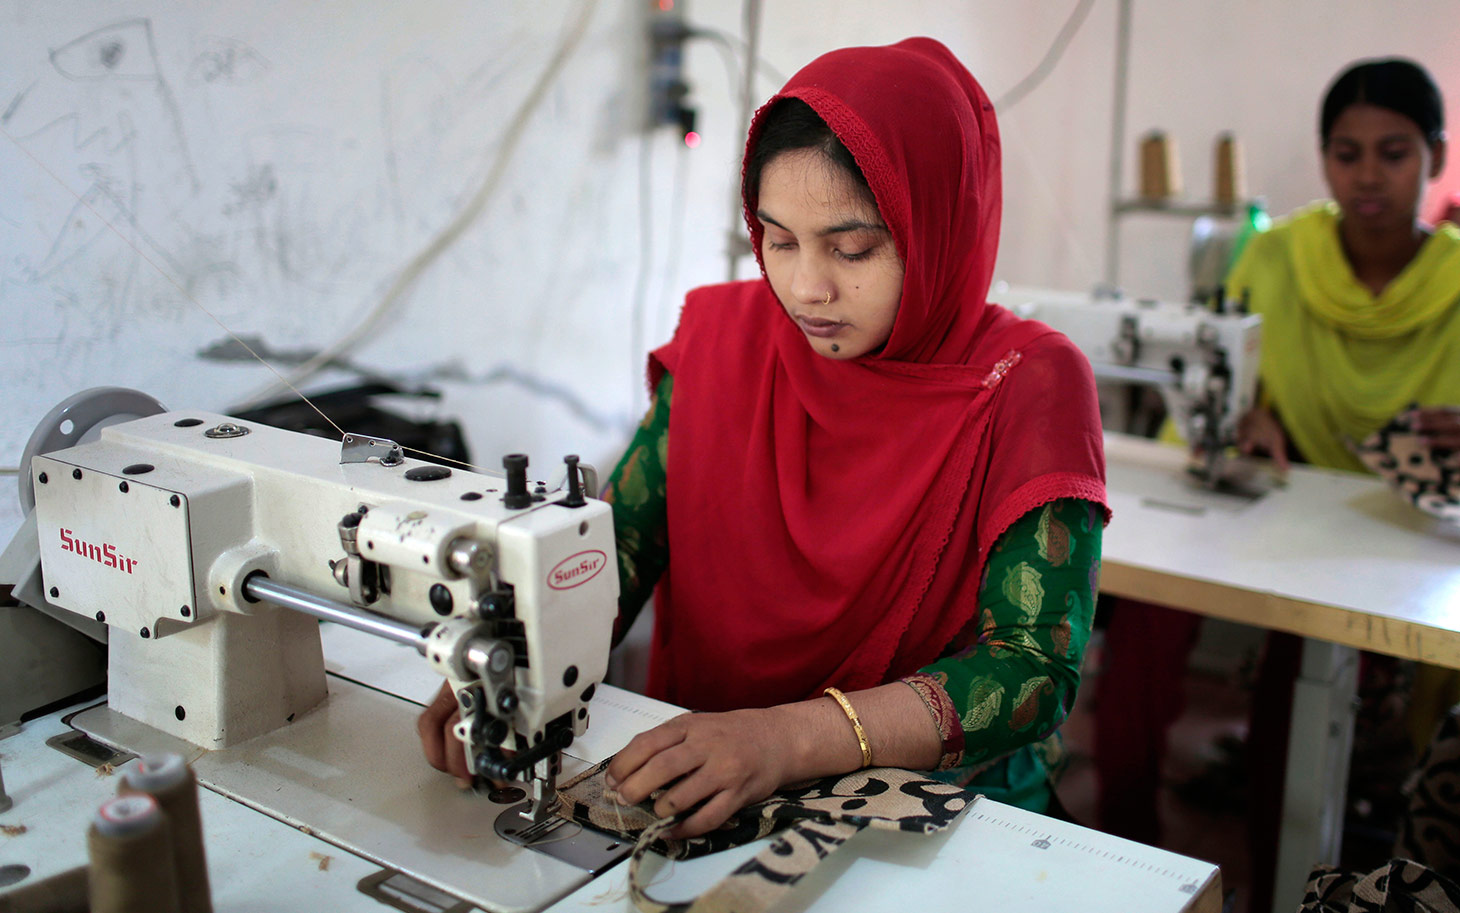 In this Monday, April 20, 2015 photo, Bangladeshi garment workers, who worked at the Rana Plaza garment factory that collapsed two years ago, work at a factory meant to rehabilitate survivors of the accident, the worst in the history of the garment industry, in Savar, near Dhaka, Bangladesh. Human Rights Watch has criticized the Bangladeshi government for failing to protect workers, saying not enough is being done to eliminate assault, intimidation and other abuses still common in the garment industry. Bangladesh suffered its worst industrial disaster when Rana Plaza, an illegally built, multistoried building located outside of Dhaka, Bangladesh's capital, collapsed in 2013 killing 1,127 people and injuring about 2,500. (AP Photo/A.M. Ahad)